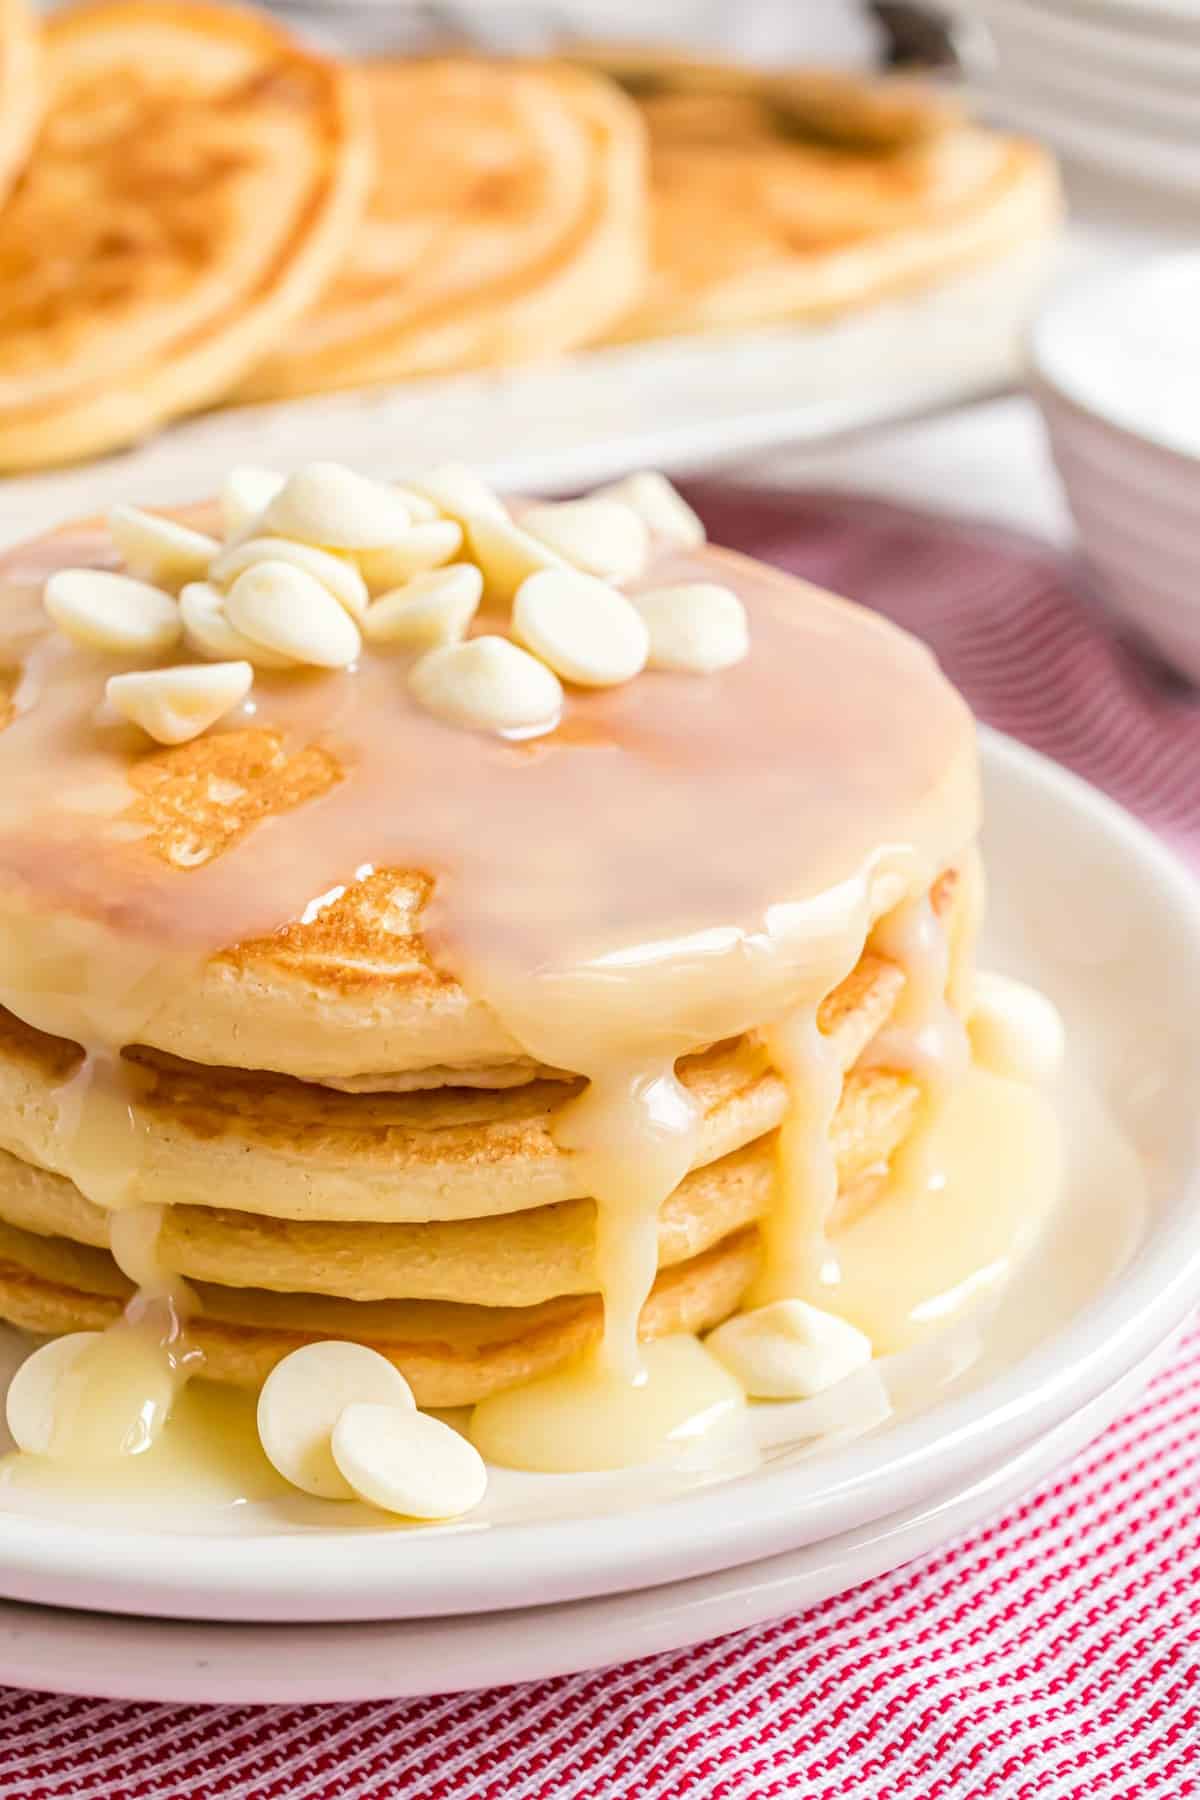 Stack of white chocolate pancakes with syrup and white chocolate chips.